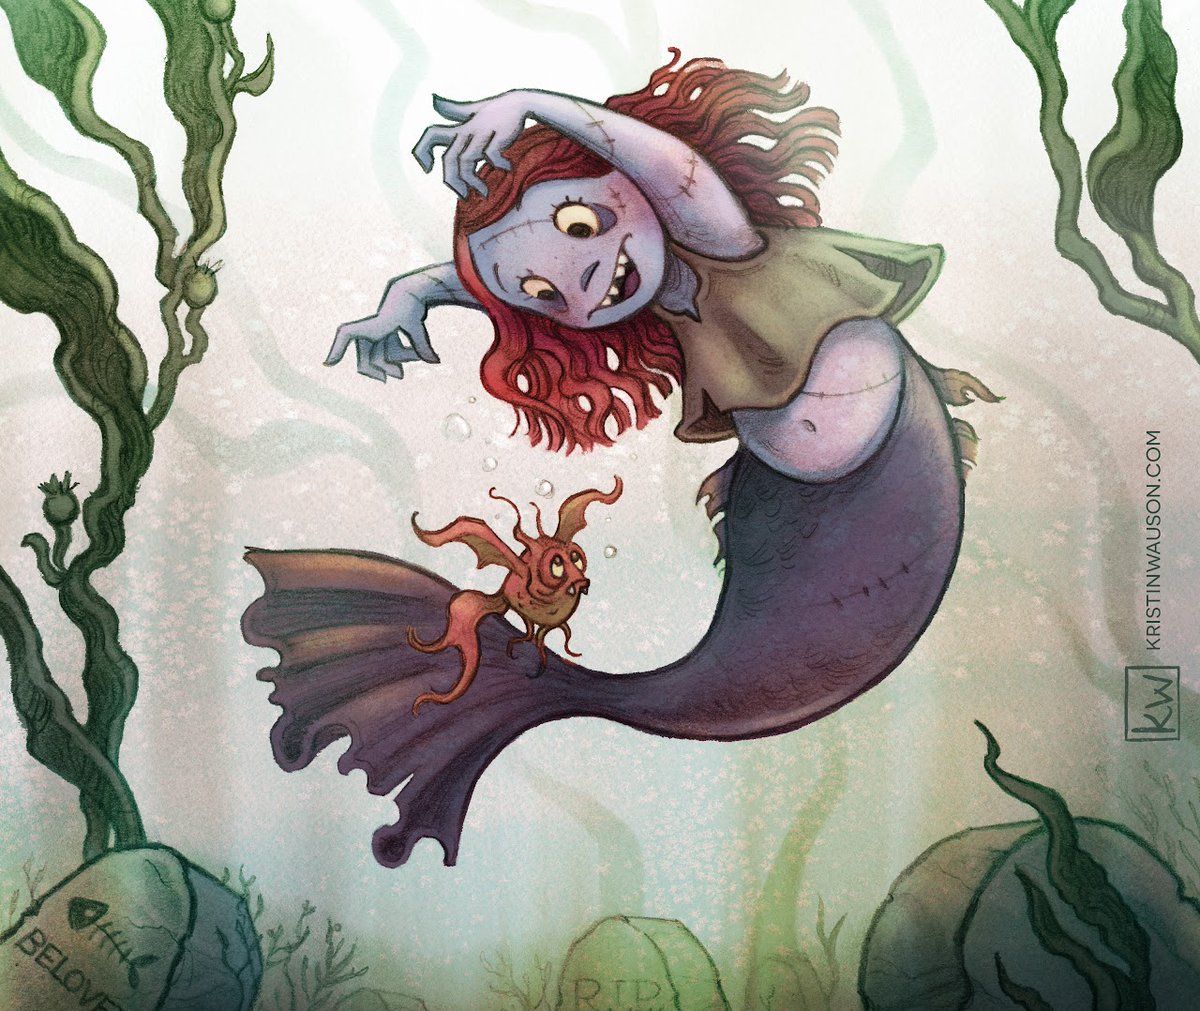 #KidlitZombieWeek is the first week of July this year! 

Show us you're excited by sharing your favorite #zombie or #mermaid gif in honor of @kristinwauson's merzombie mascot!

Make sure to RT & share with all your #amwriting friends! 

Details here: sites.google.com/view/kidlit-zo…